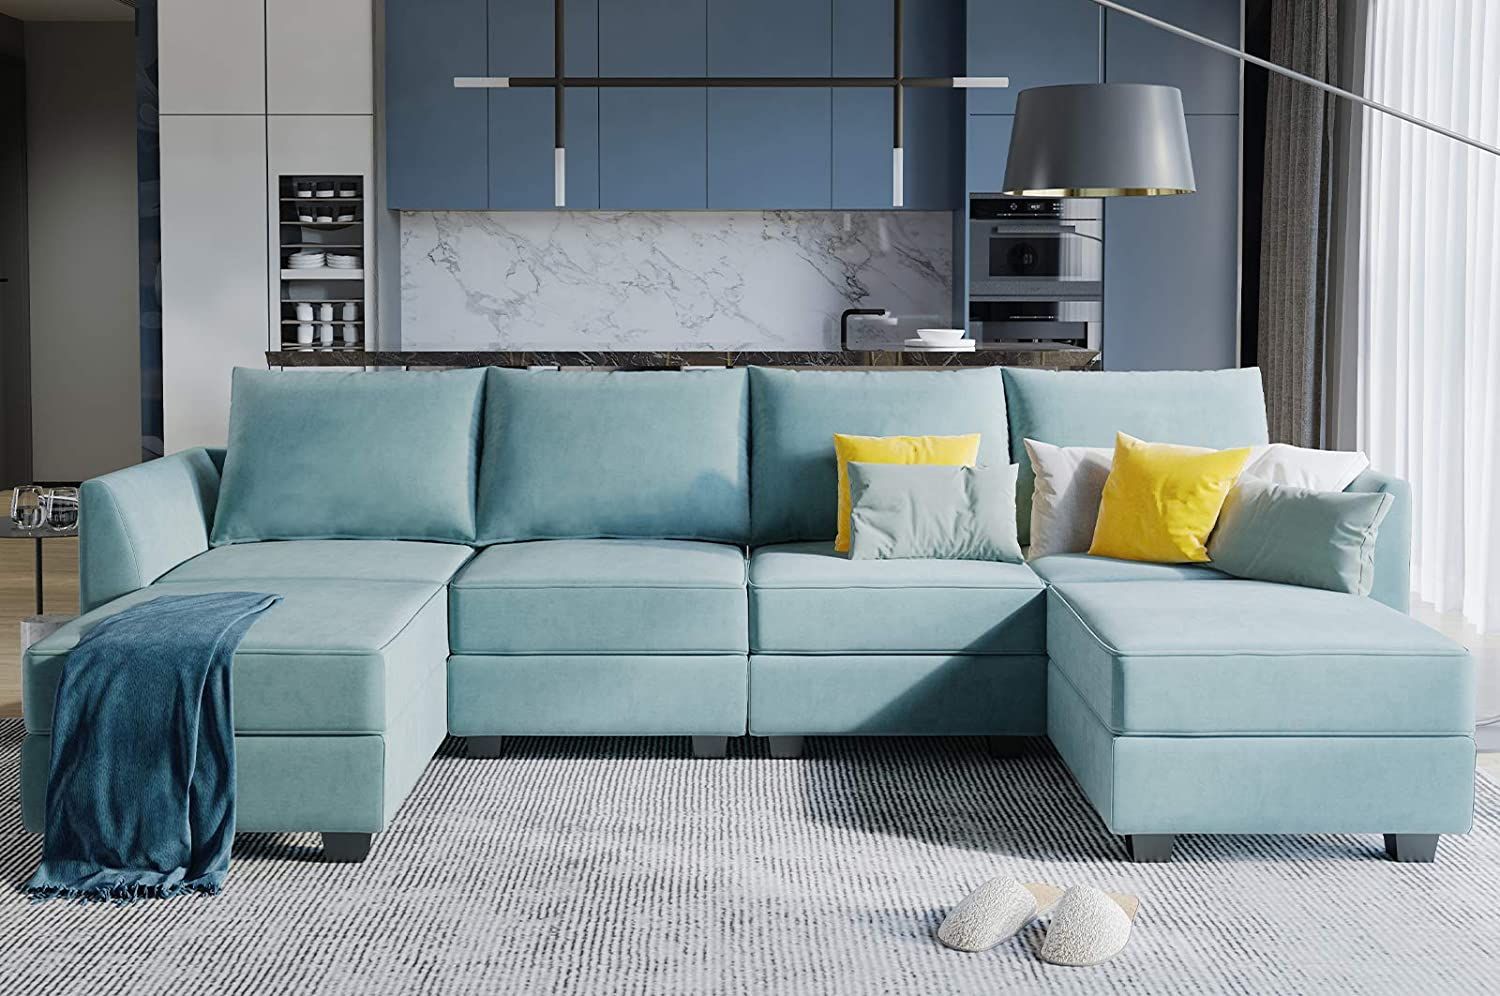 The 10 Best Couches of 2021 - ReviewThis